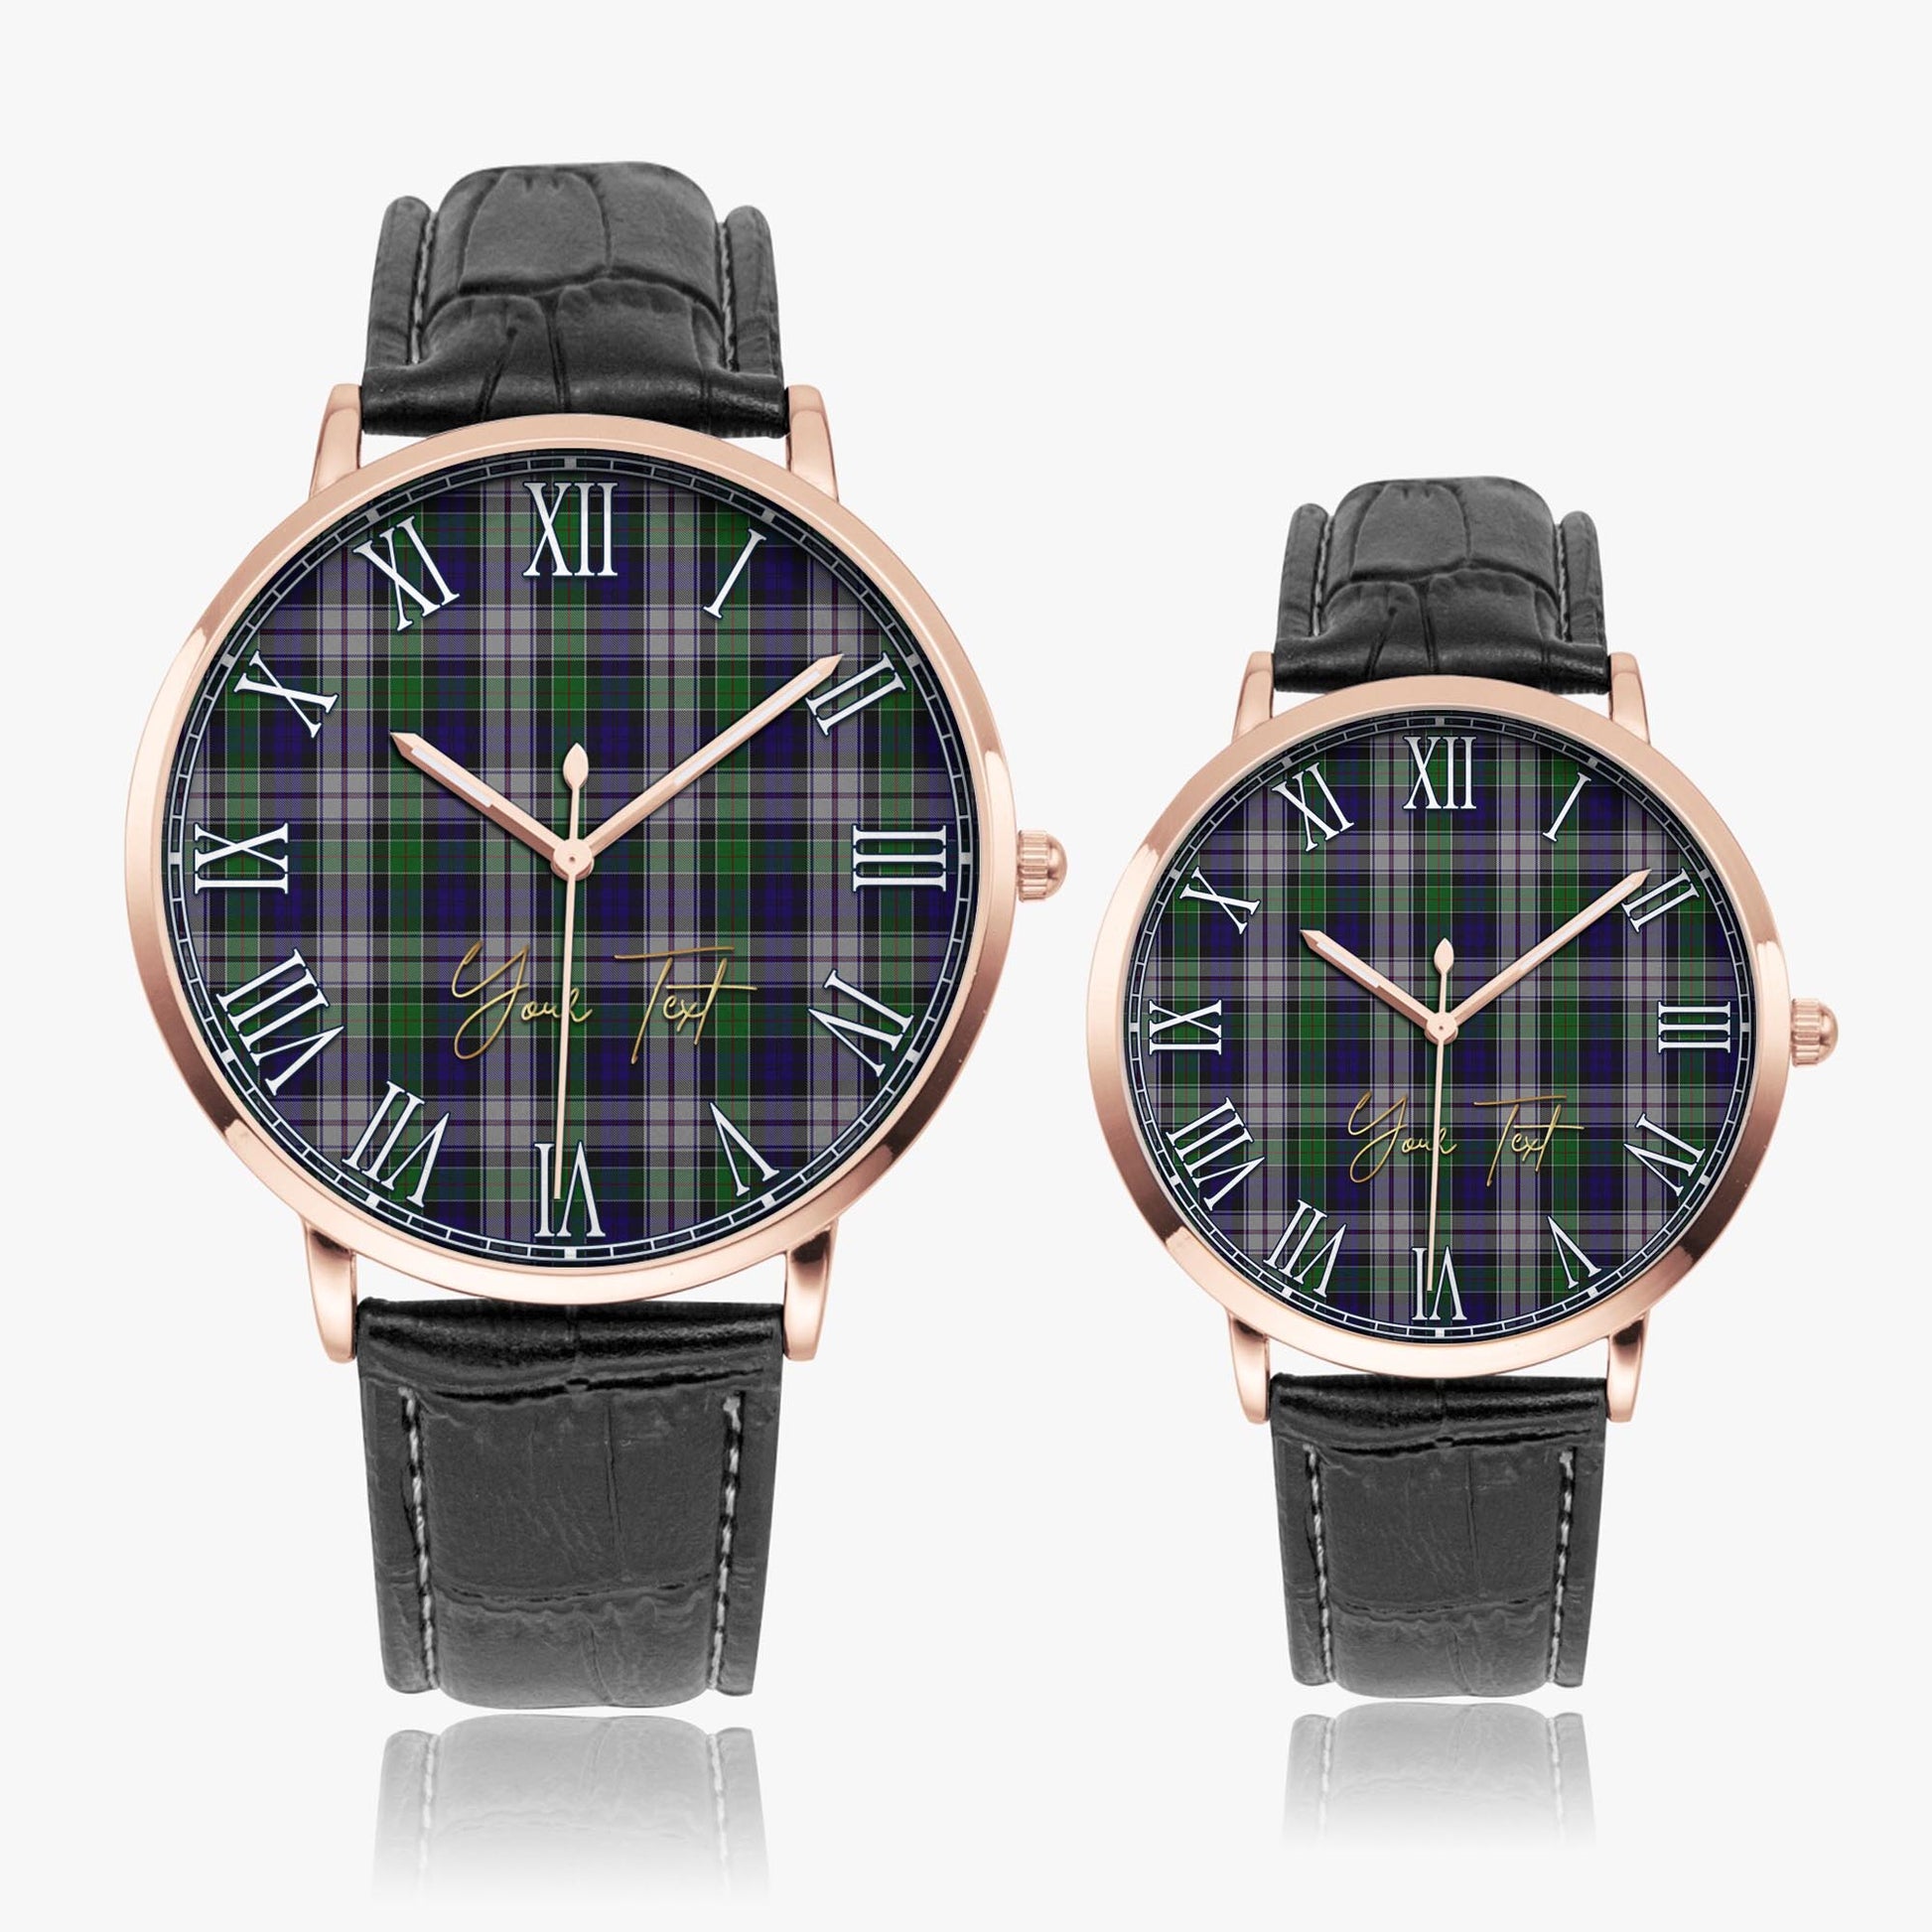 Colquhoun Dress Tartan Personalized Your Text Leather Trap Quartz Watch Ultra Thin Rose Gold Case With Black Leather Strap - Tartanvibesclothing